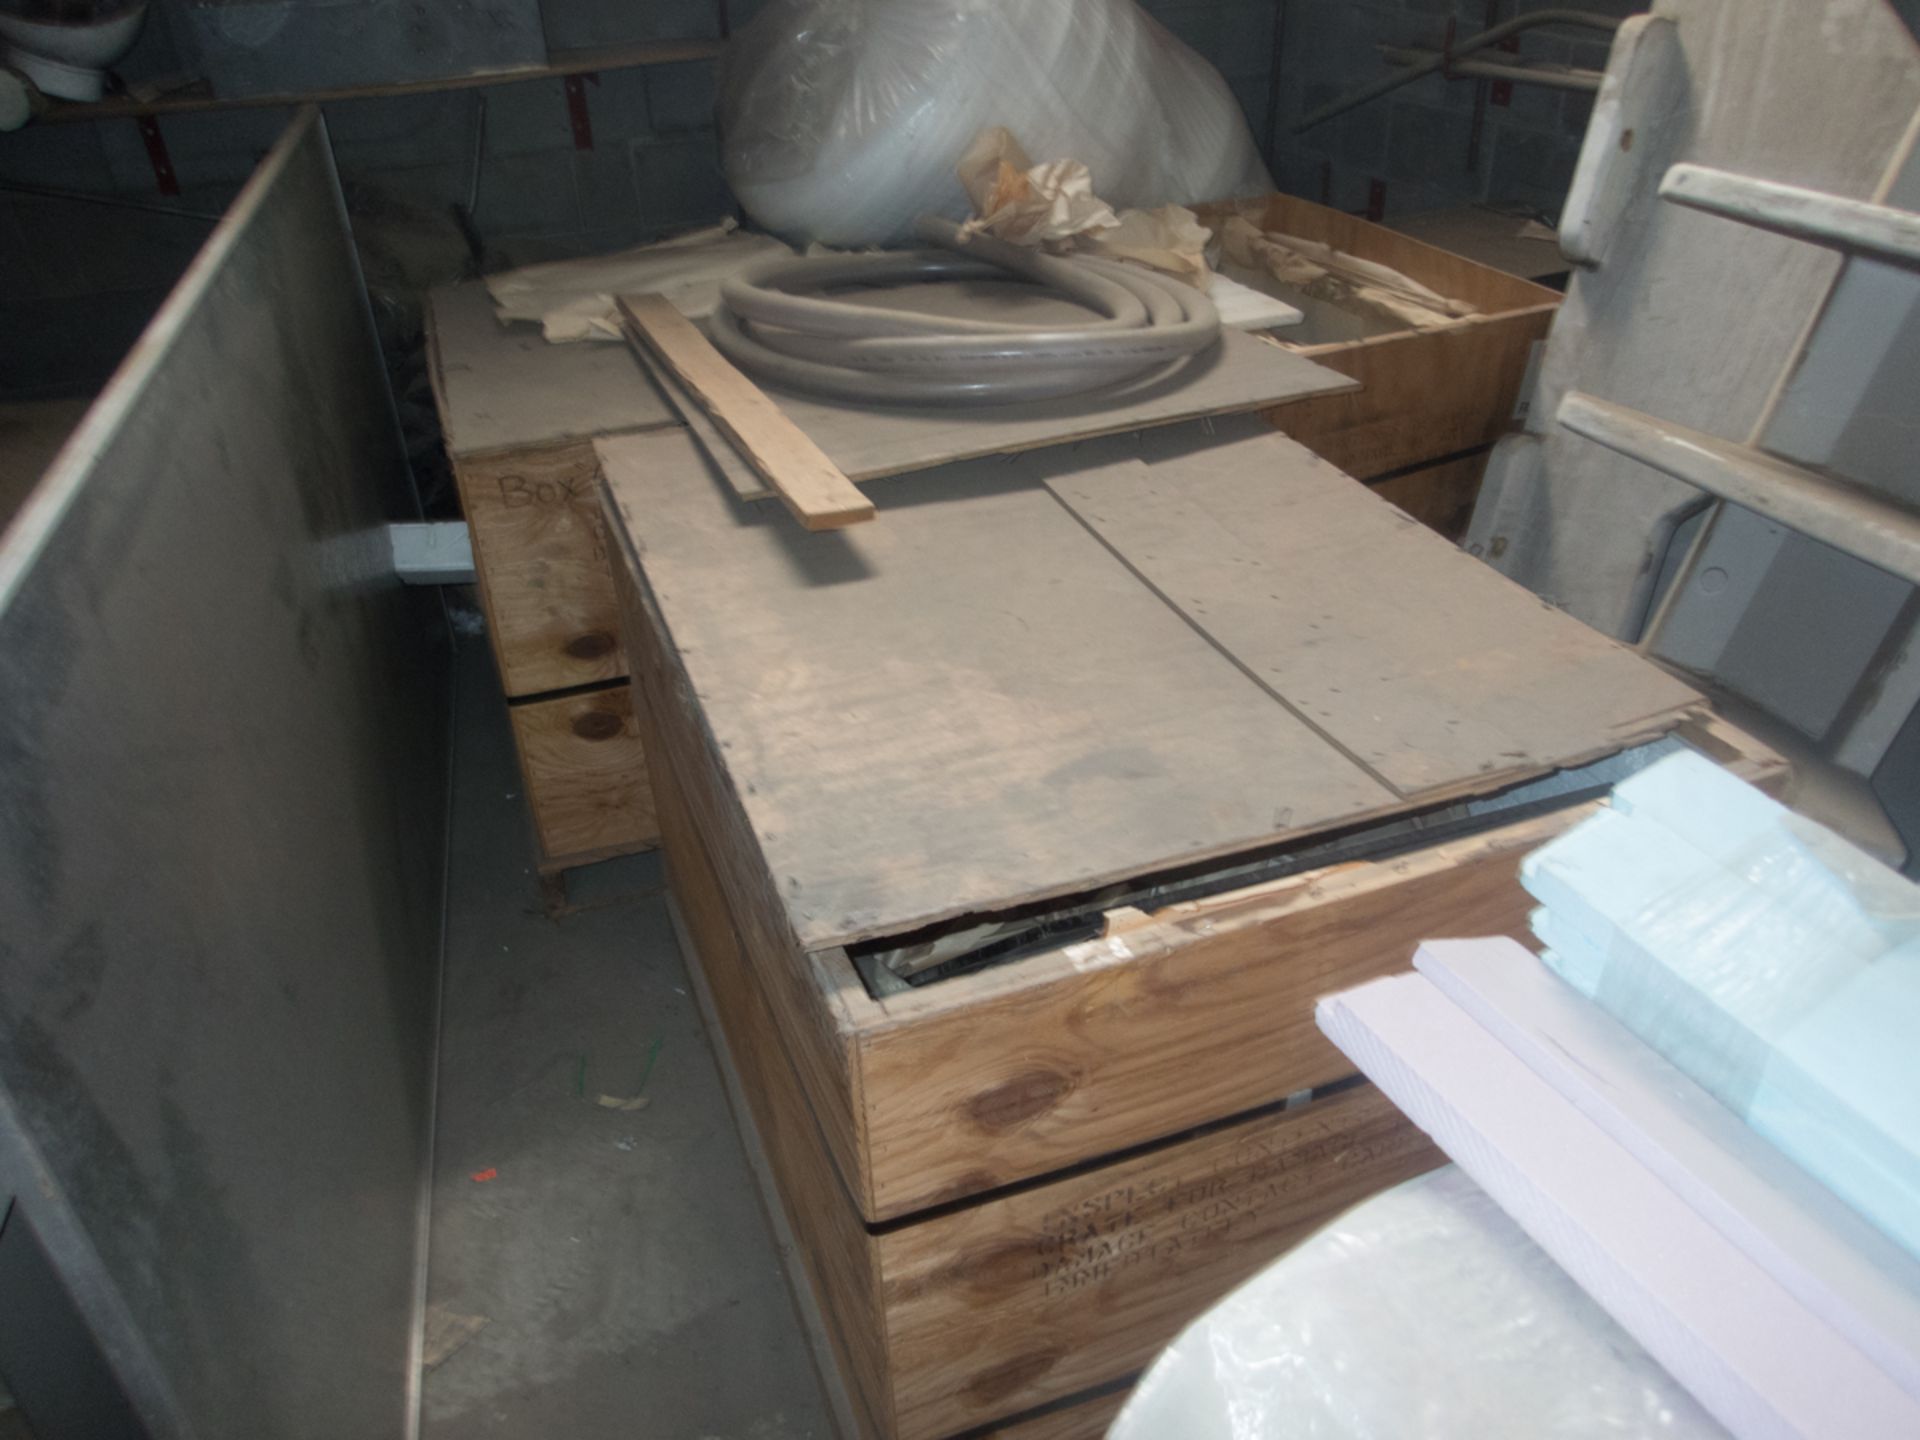 LOT OF ASSORTED STYROFOAM, INSULATION PANELS, GLASS ETC (BASSINETTE/ANTIQUES NOT INCLUDED) - Image 5 of 5